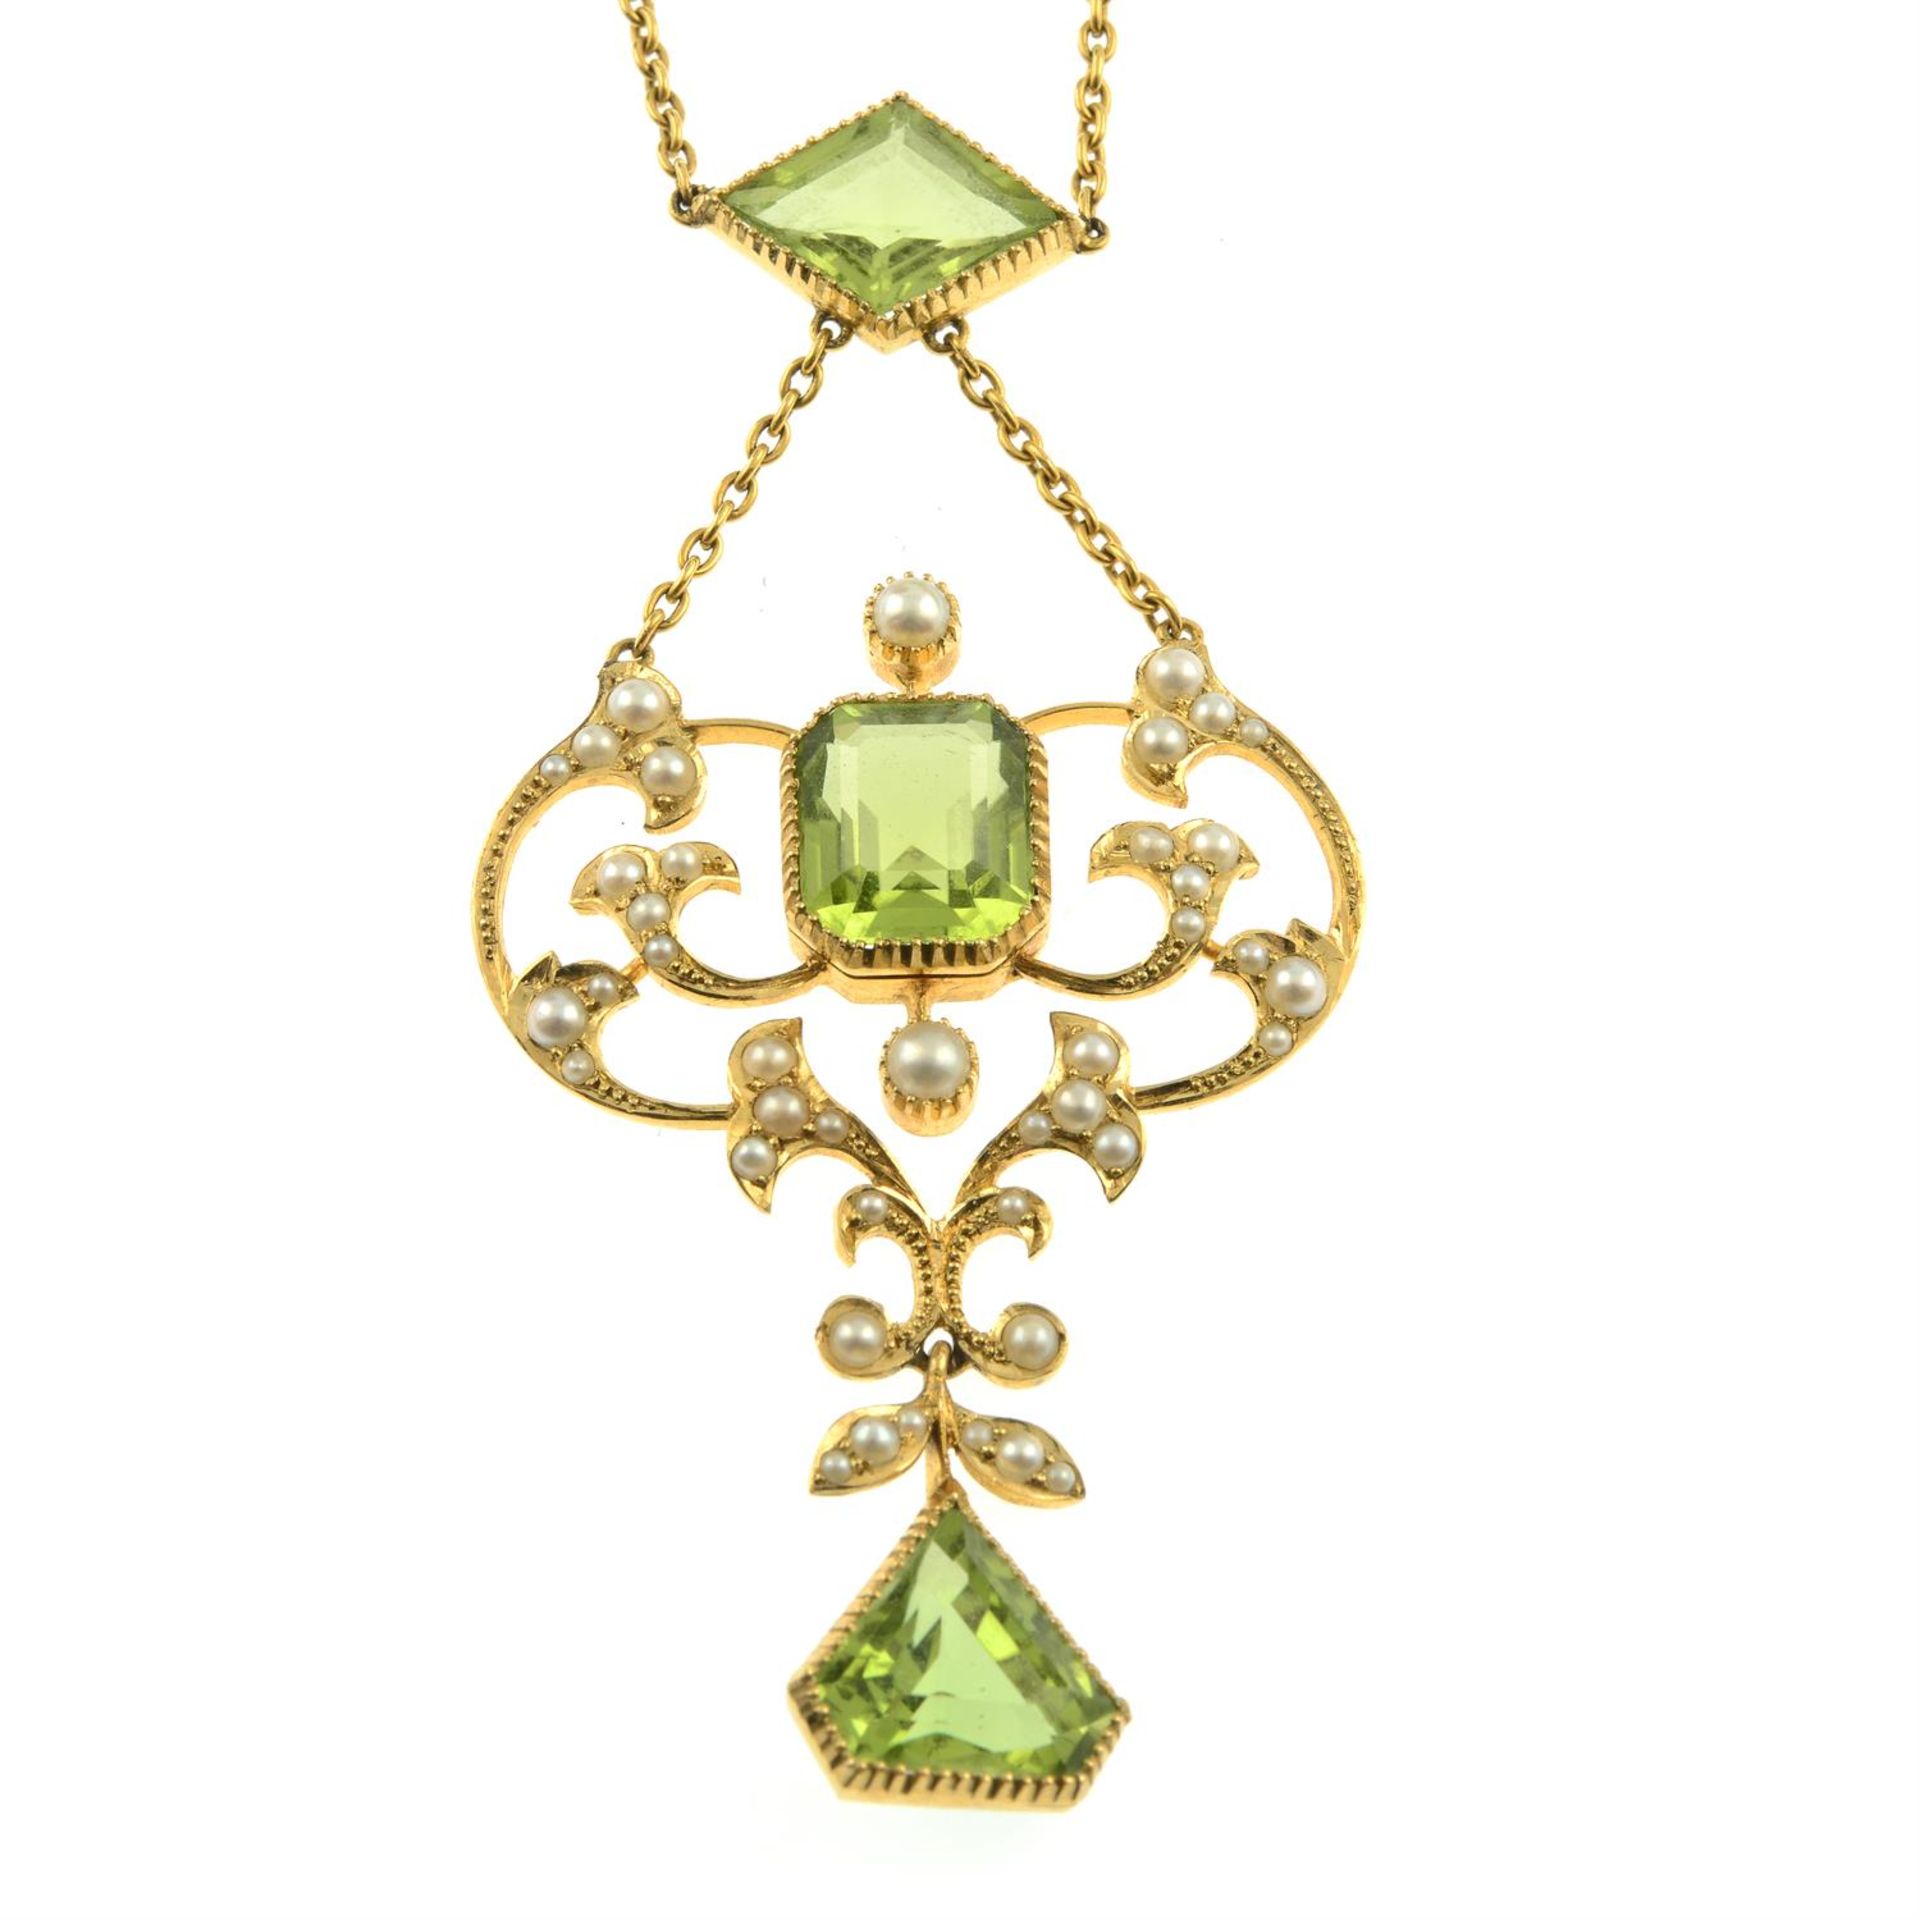 An Edwardian 15ct gold peridot and split pearl pendant necklace, with fitted case. - Image 2 of 6